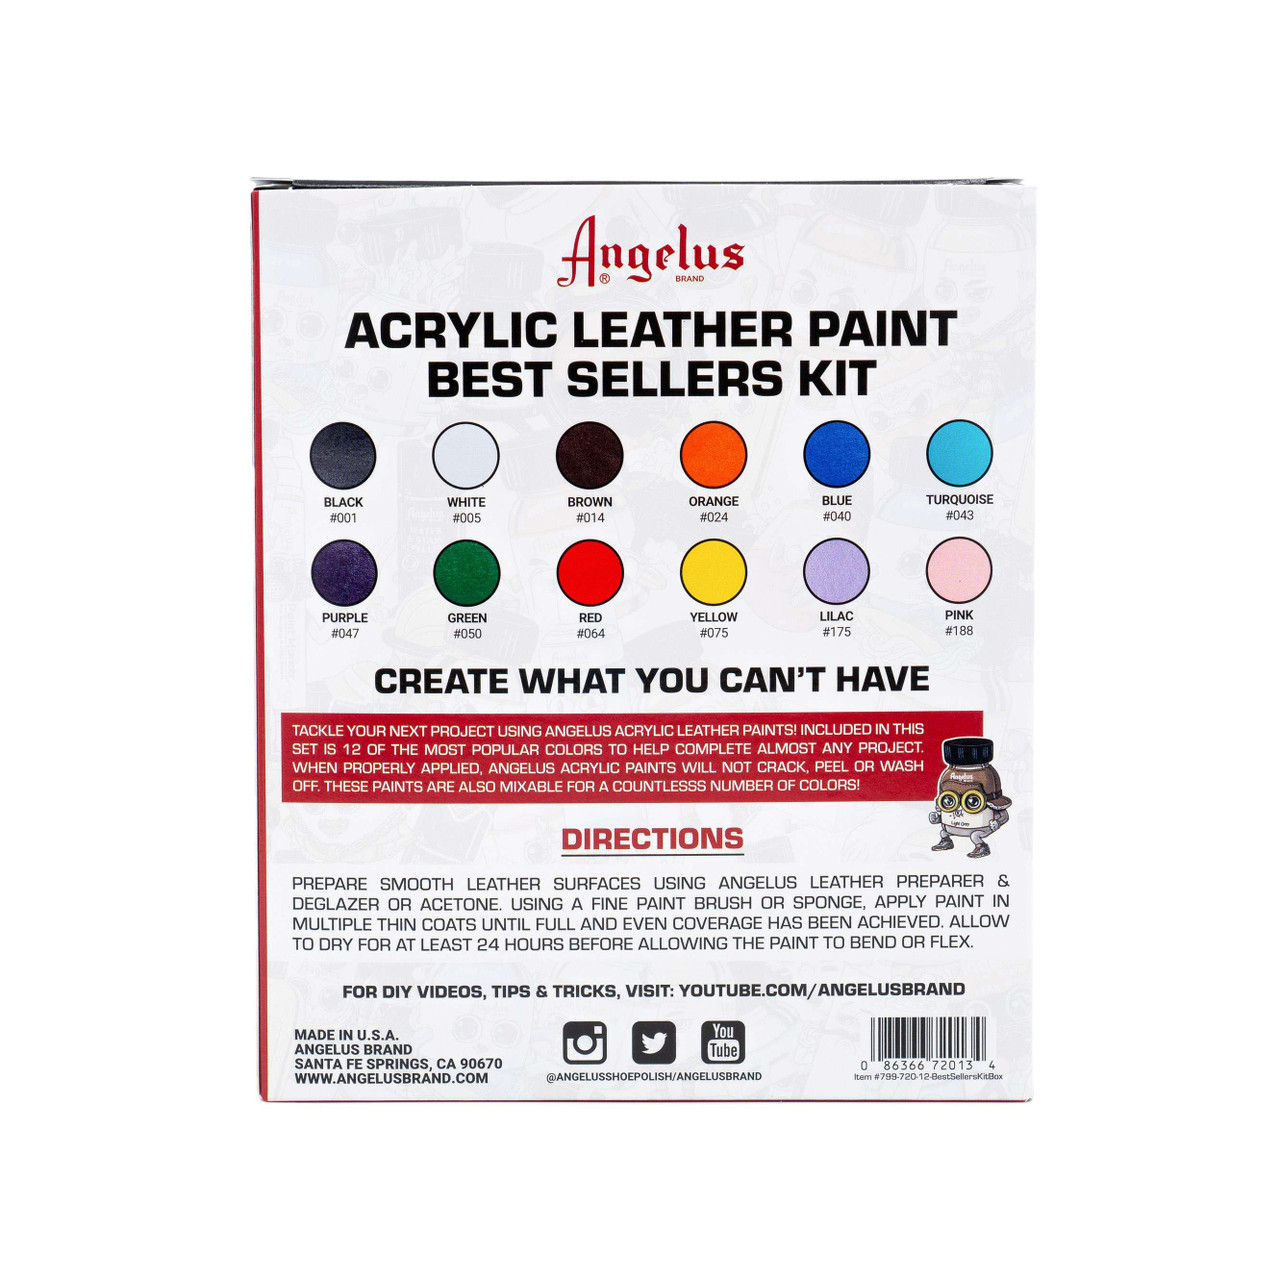 Acrylic Painting Kit set includes multiple accessories for